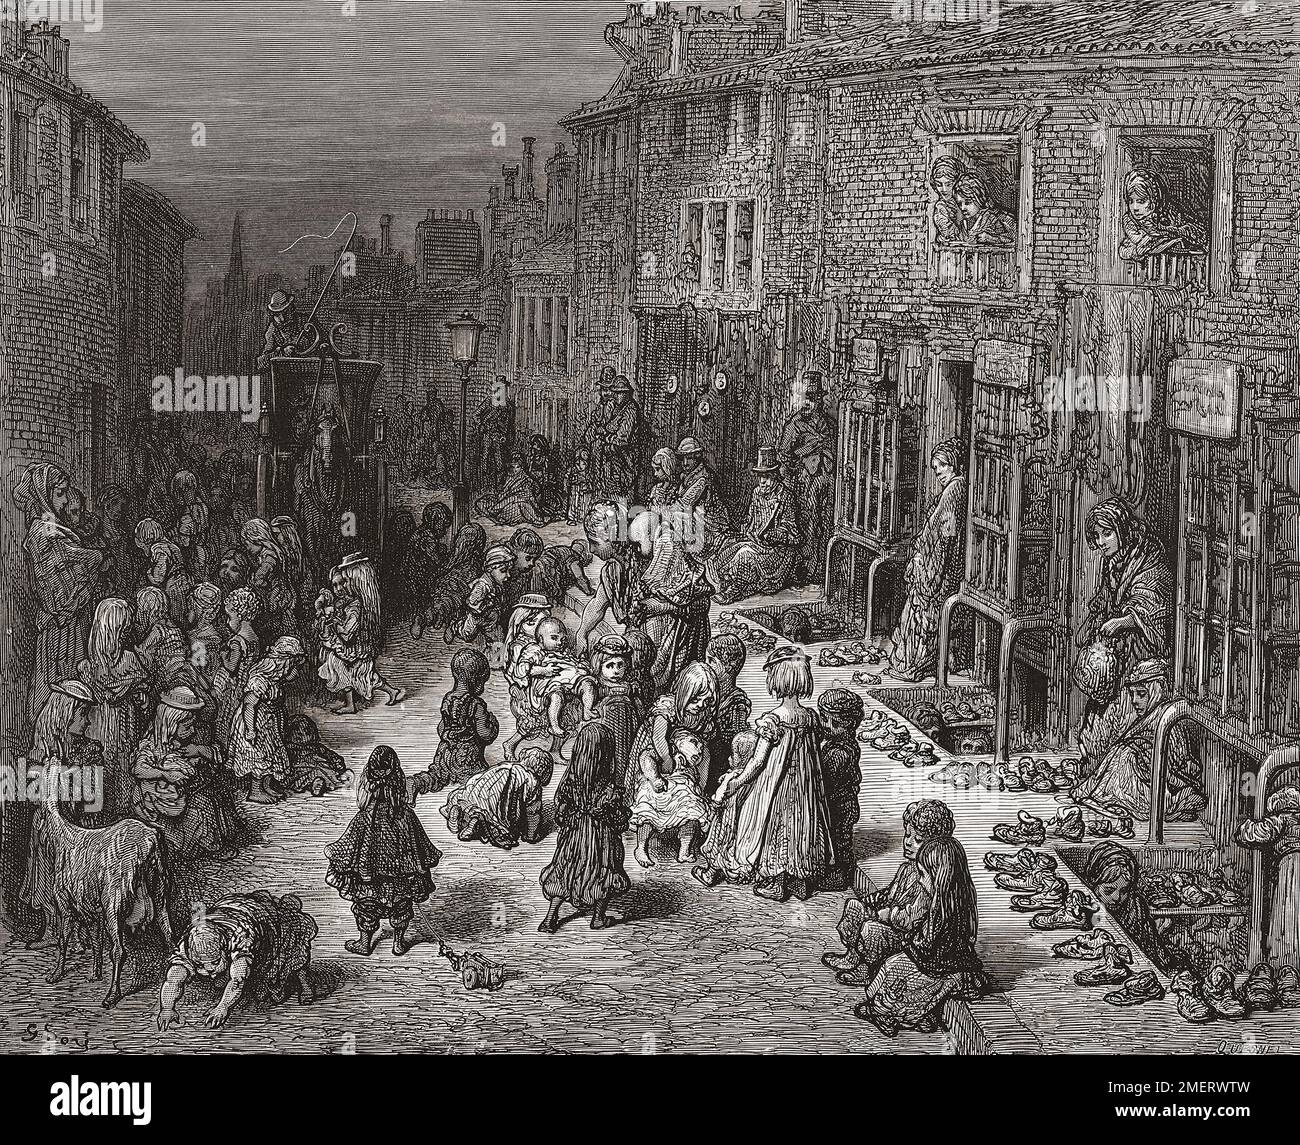 Seven Dials, Covent Garden, 19th century.  After an illustration by Gustave Doré in the 1890 American edition of London: A Pilgrimage written by Blanchard Jerrold and illustrated by Gustave Doré. Stock Photo